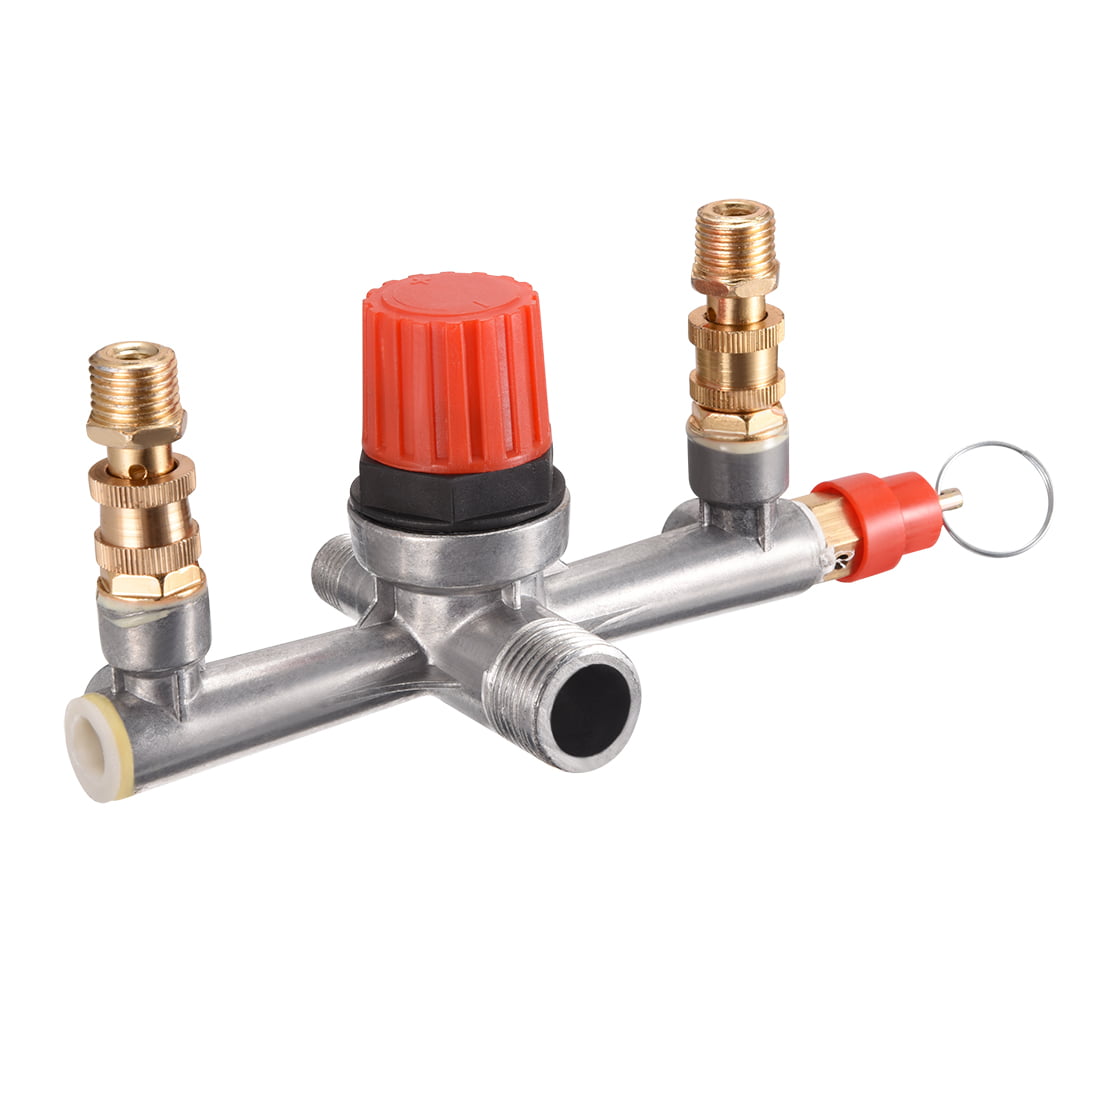 Air Compressor Parts Four Outlets 12mm and 8mm Thread Pressure Regulating Valve 